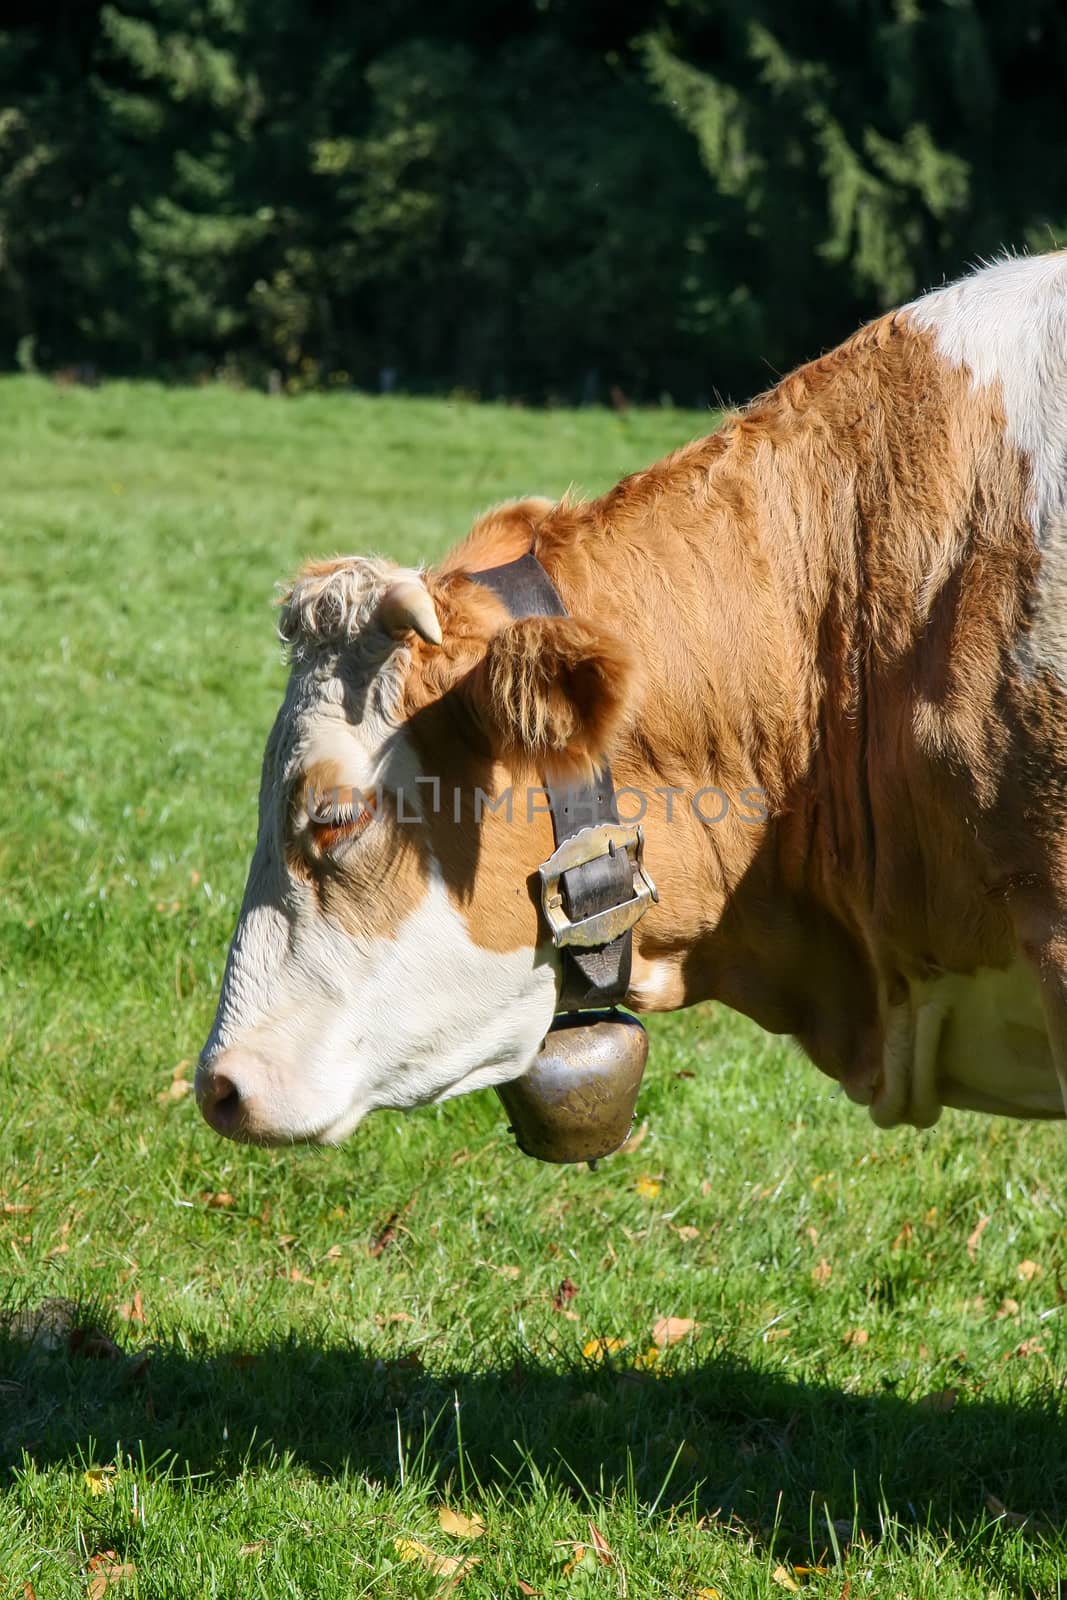 An image of a cow with bell in the green grass